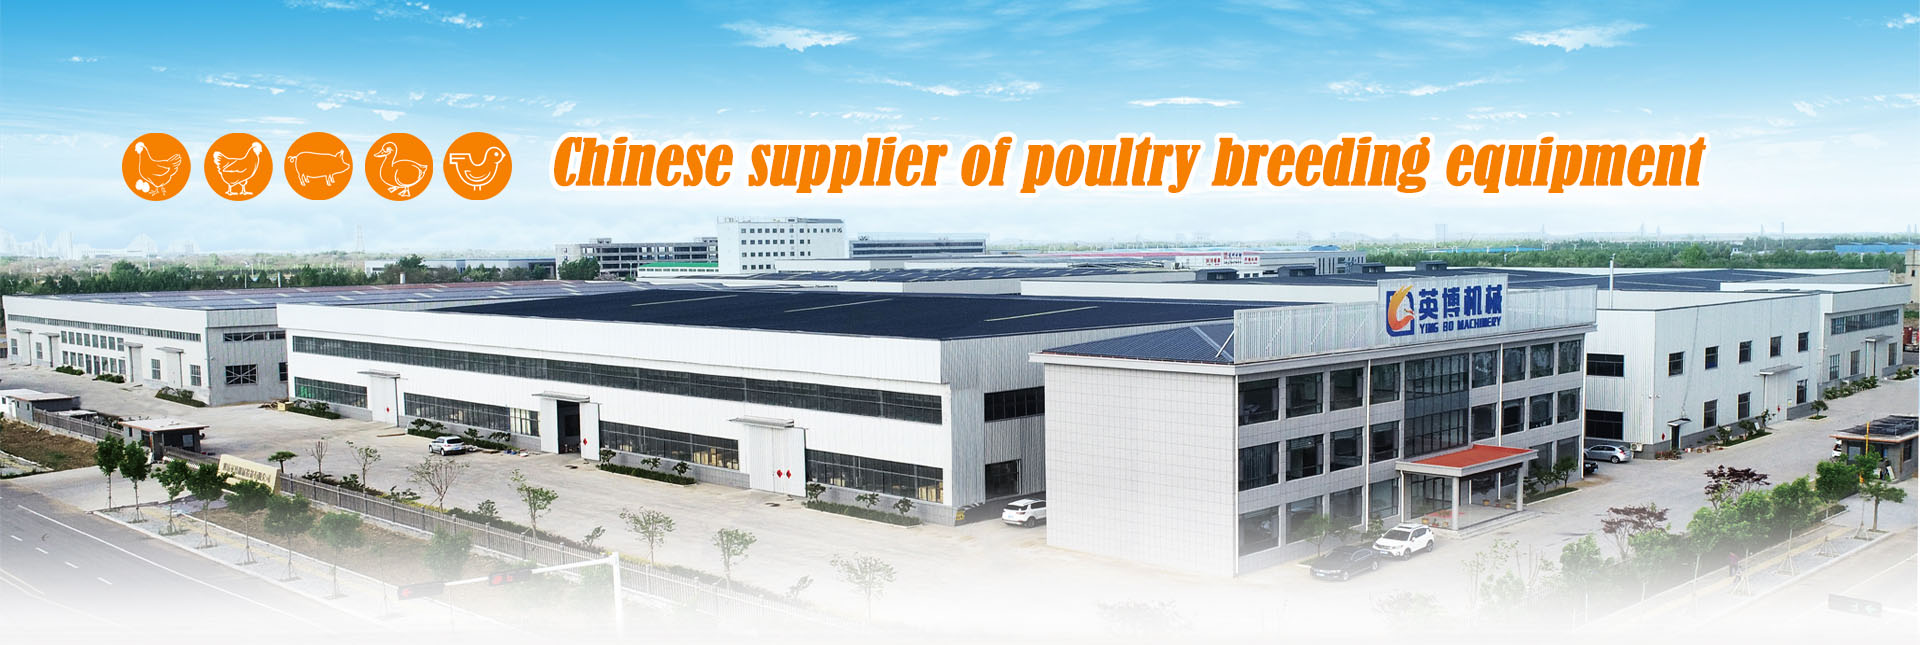 chinese supplier of poultry breeding equipment